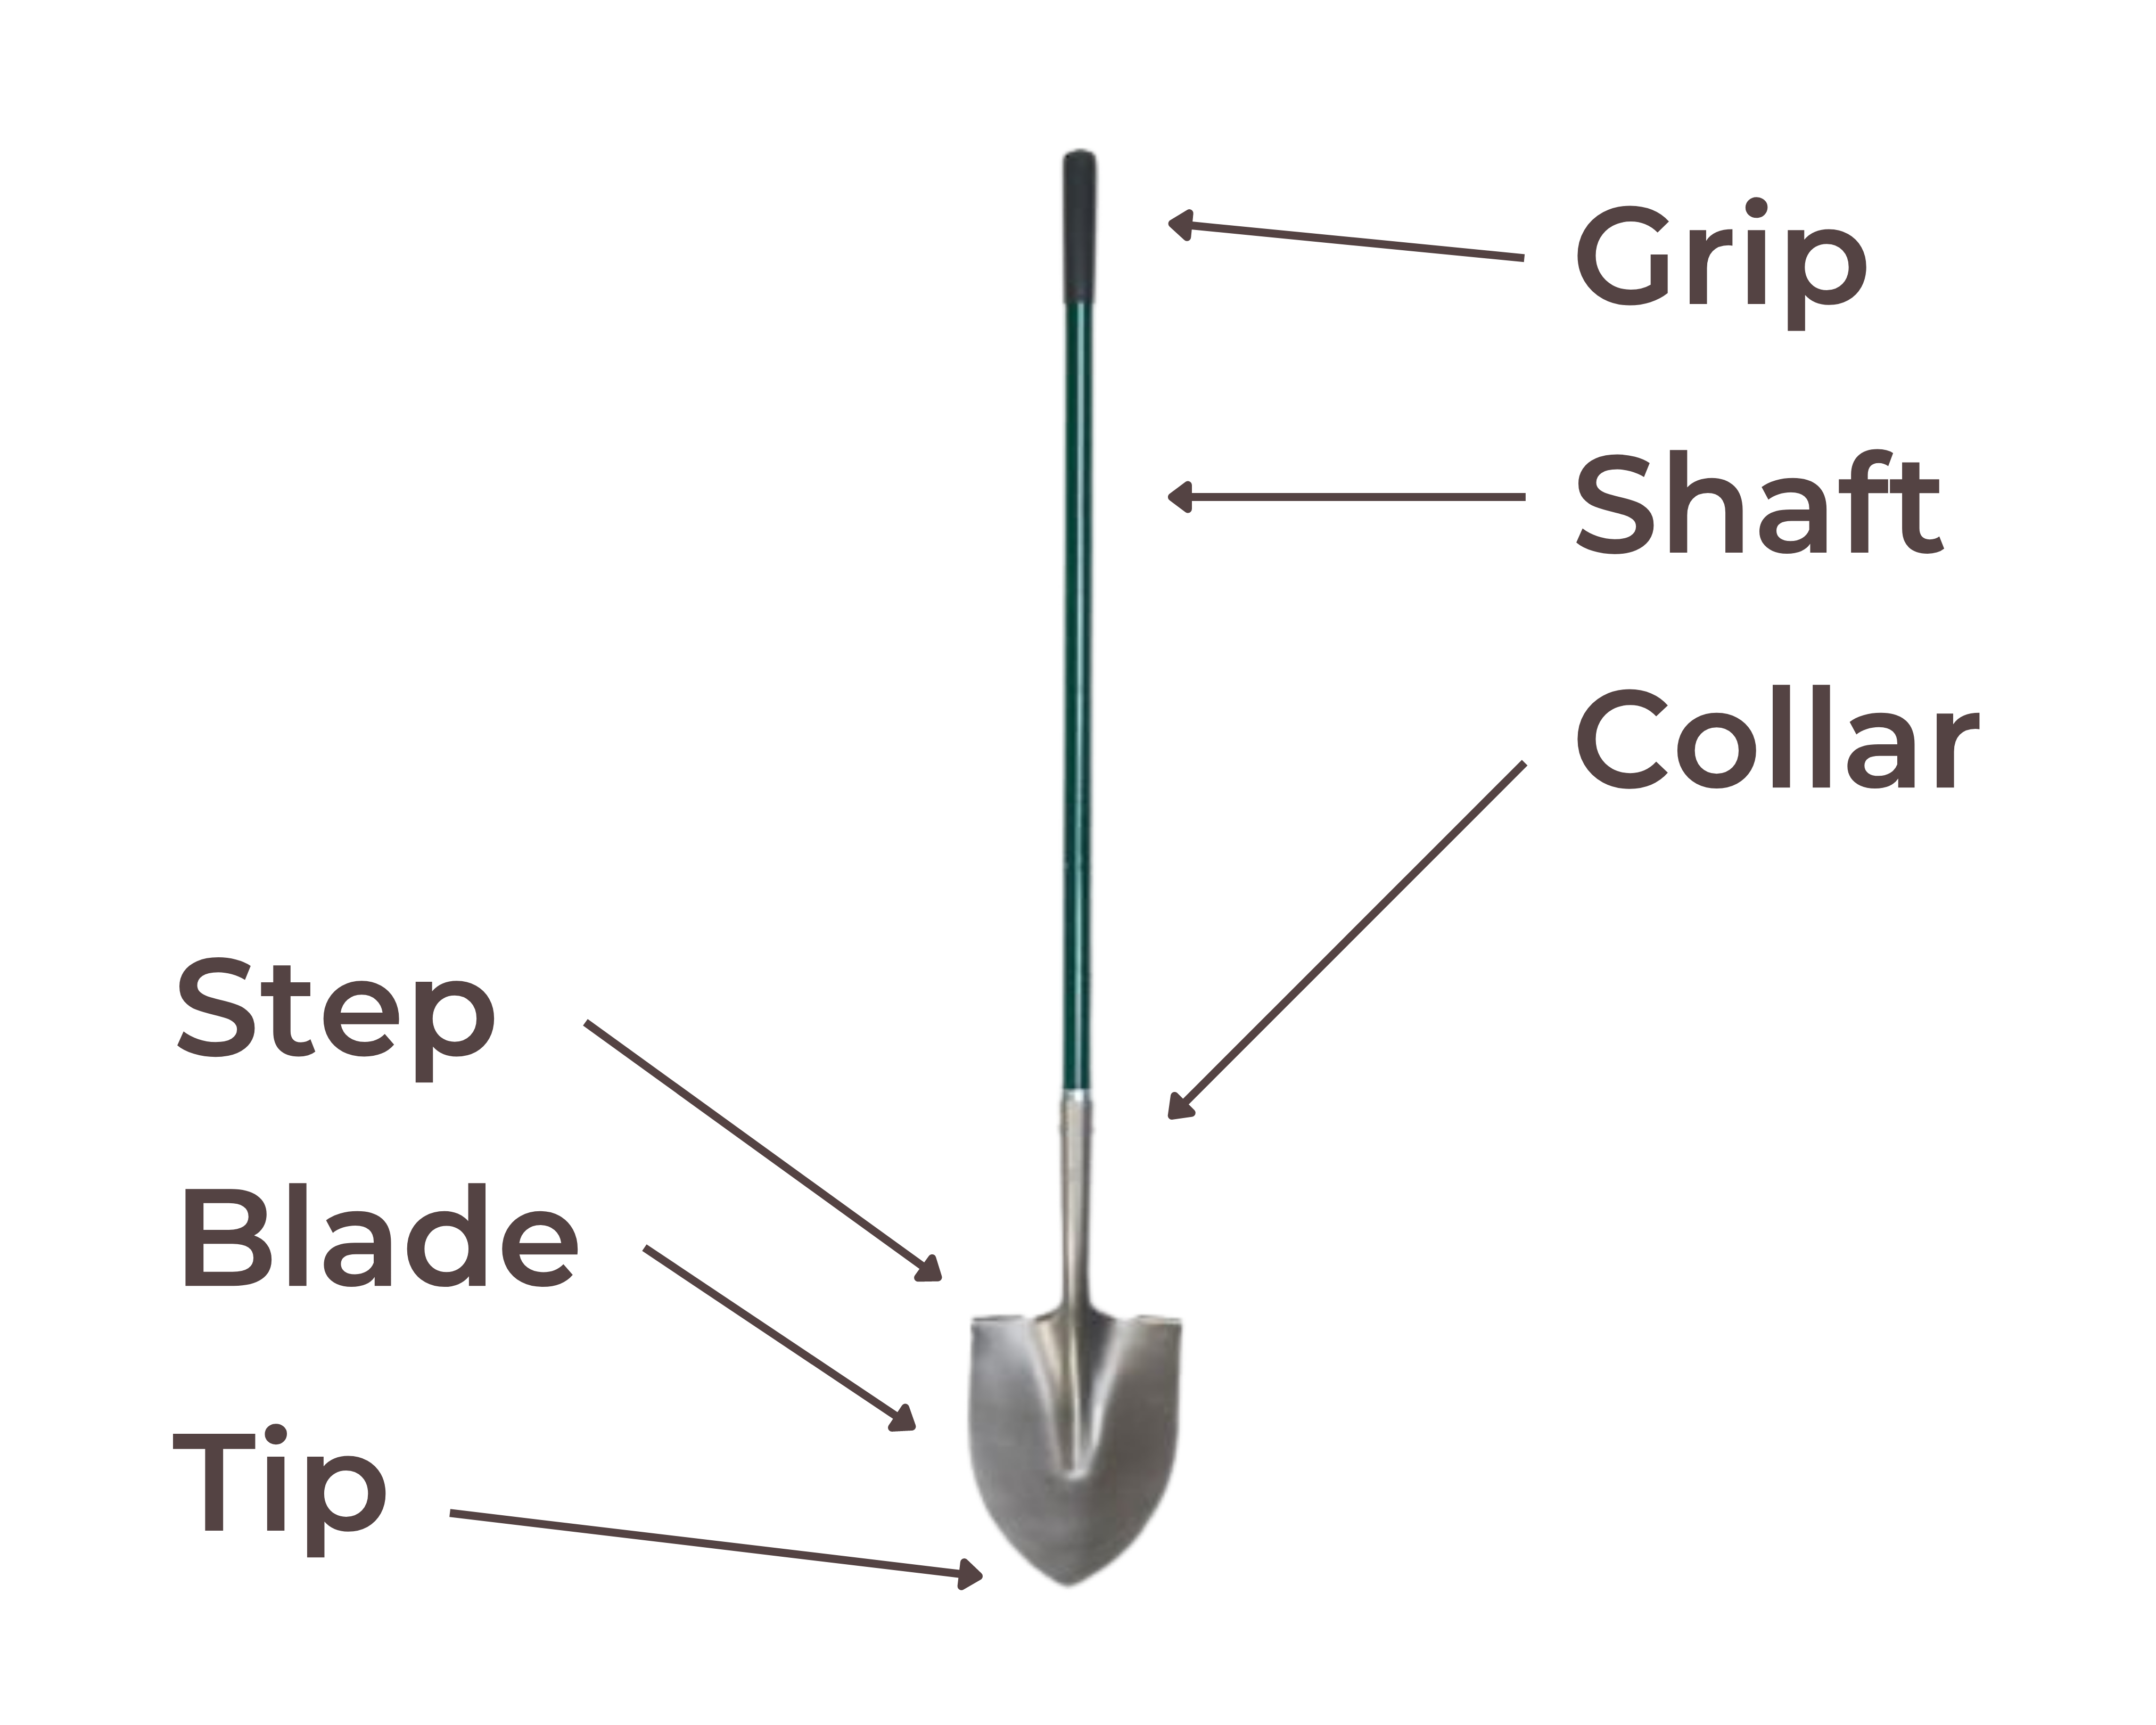 A Shovel, a Spade, and an Edger - Whats the Difference